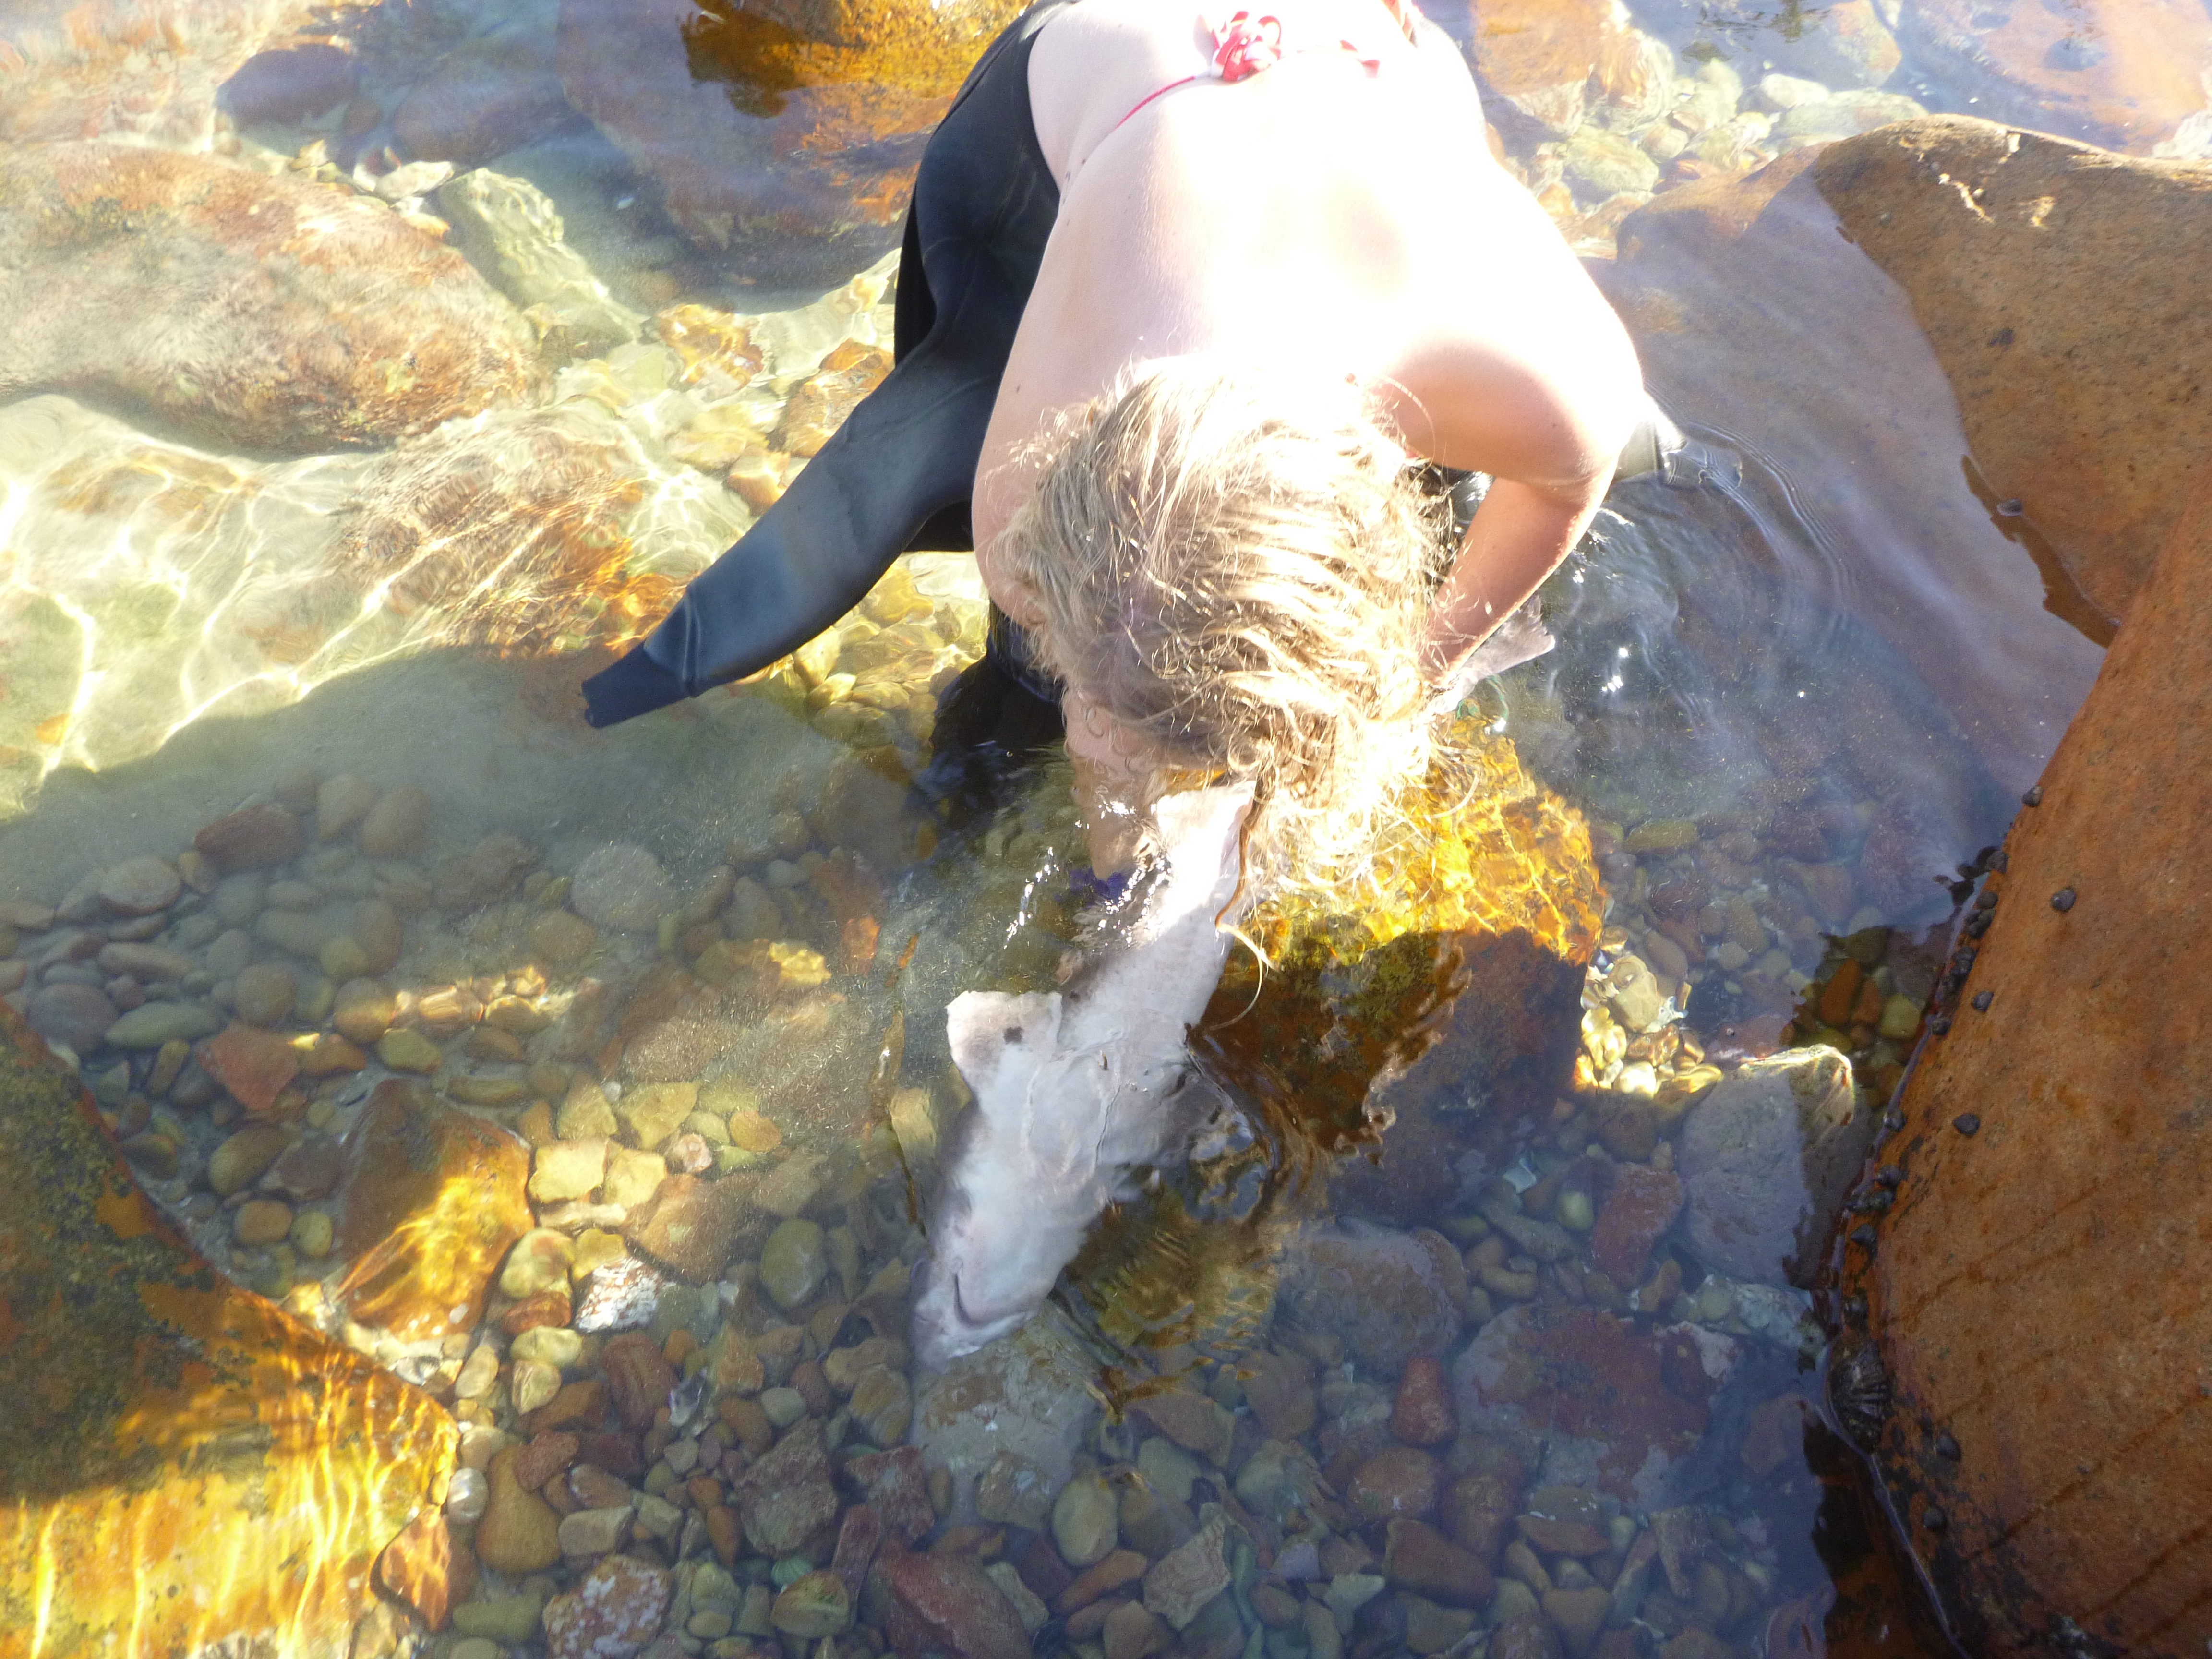  Cassandra Ruck holds an adult pyjama catshark upside-down in tonic immobility after being caught by hand free-diving. This shark was caught for use in benthic shark studies at the Shark Lab Aquarium in Mosselbaai, South Africa.